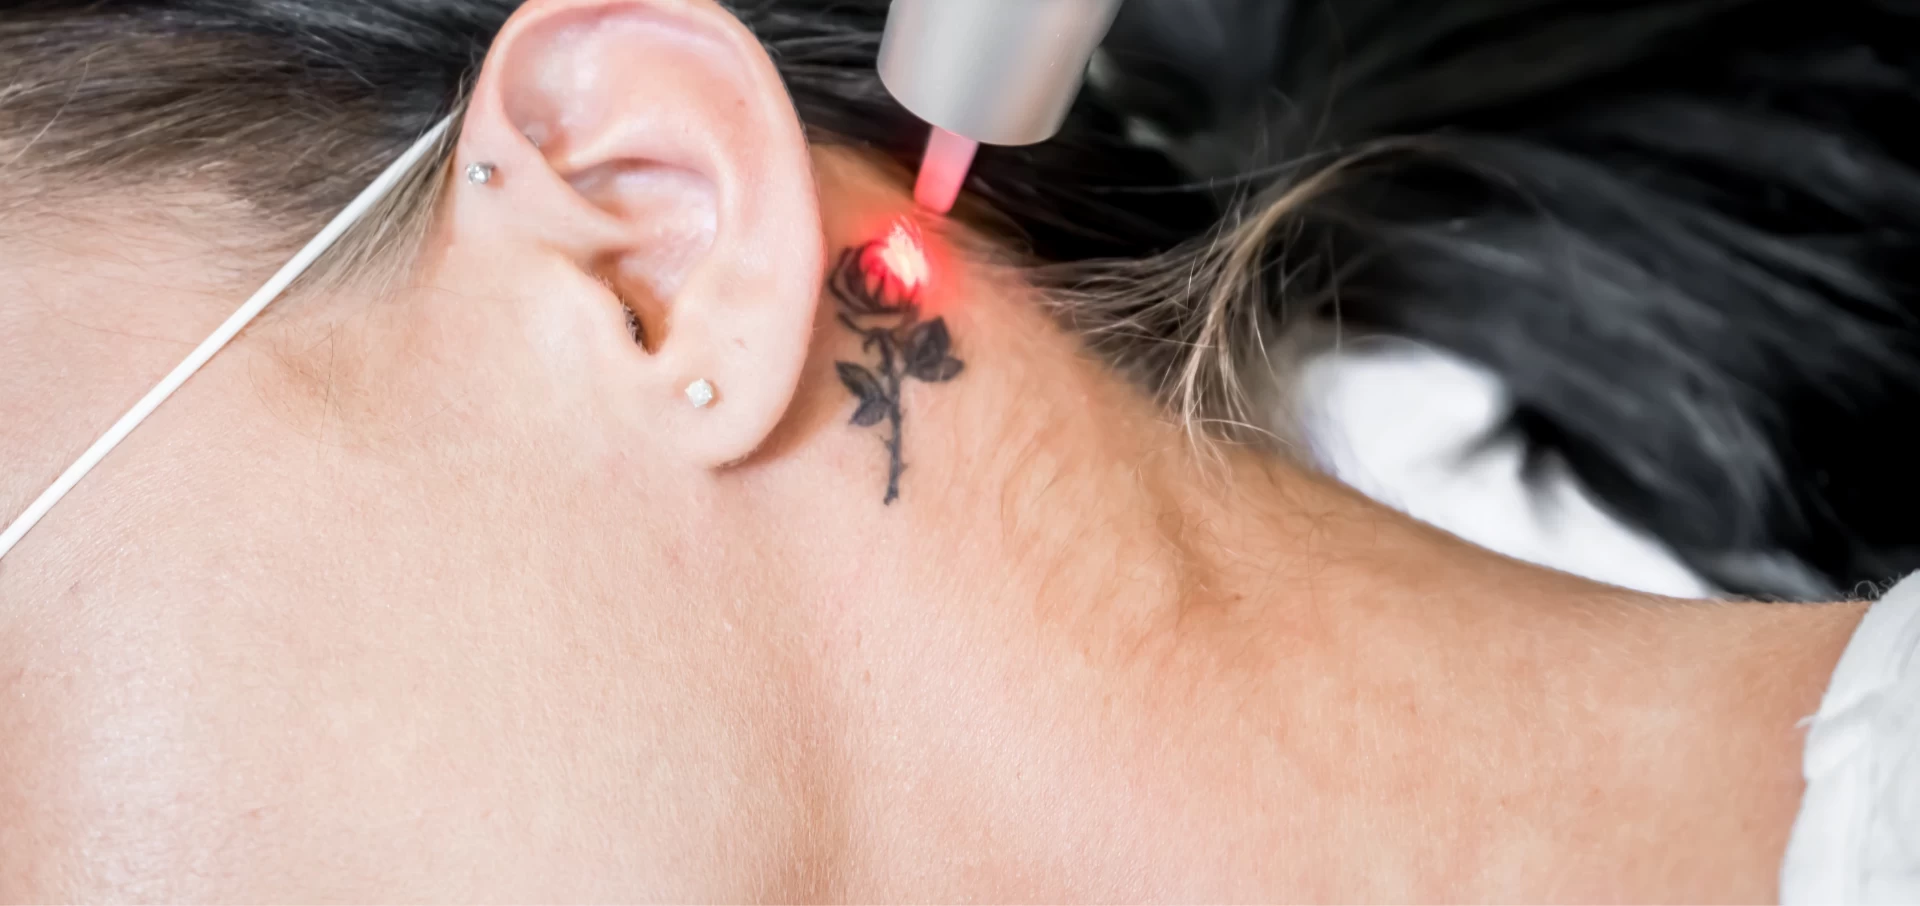 Evaluation of the Efficacy of Tattoo-Removal Treatments with Q-Switch Laser